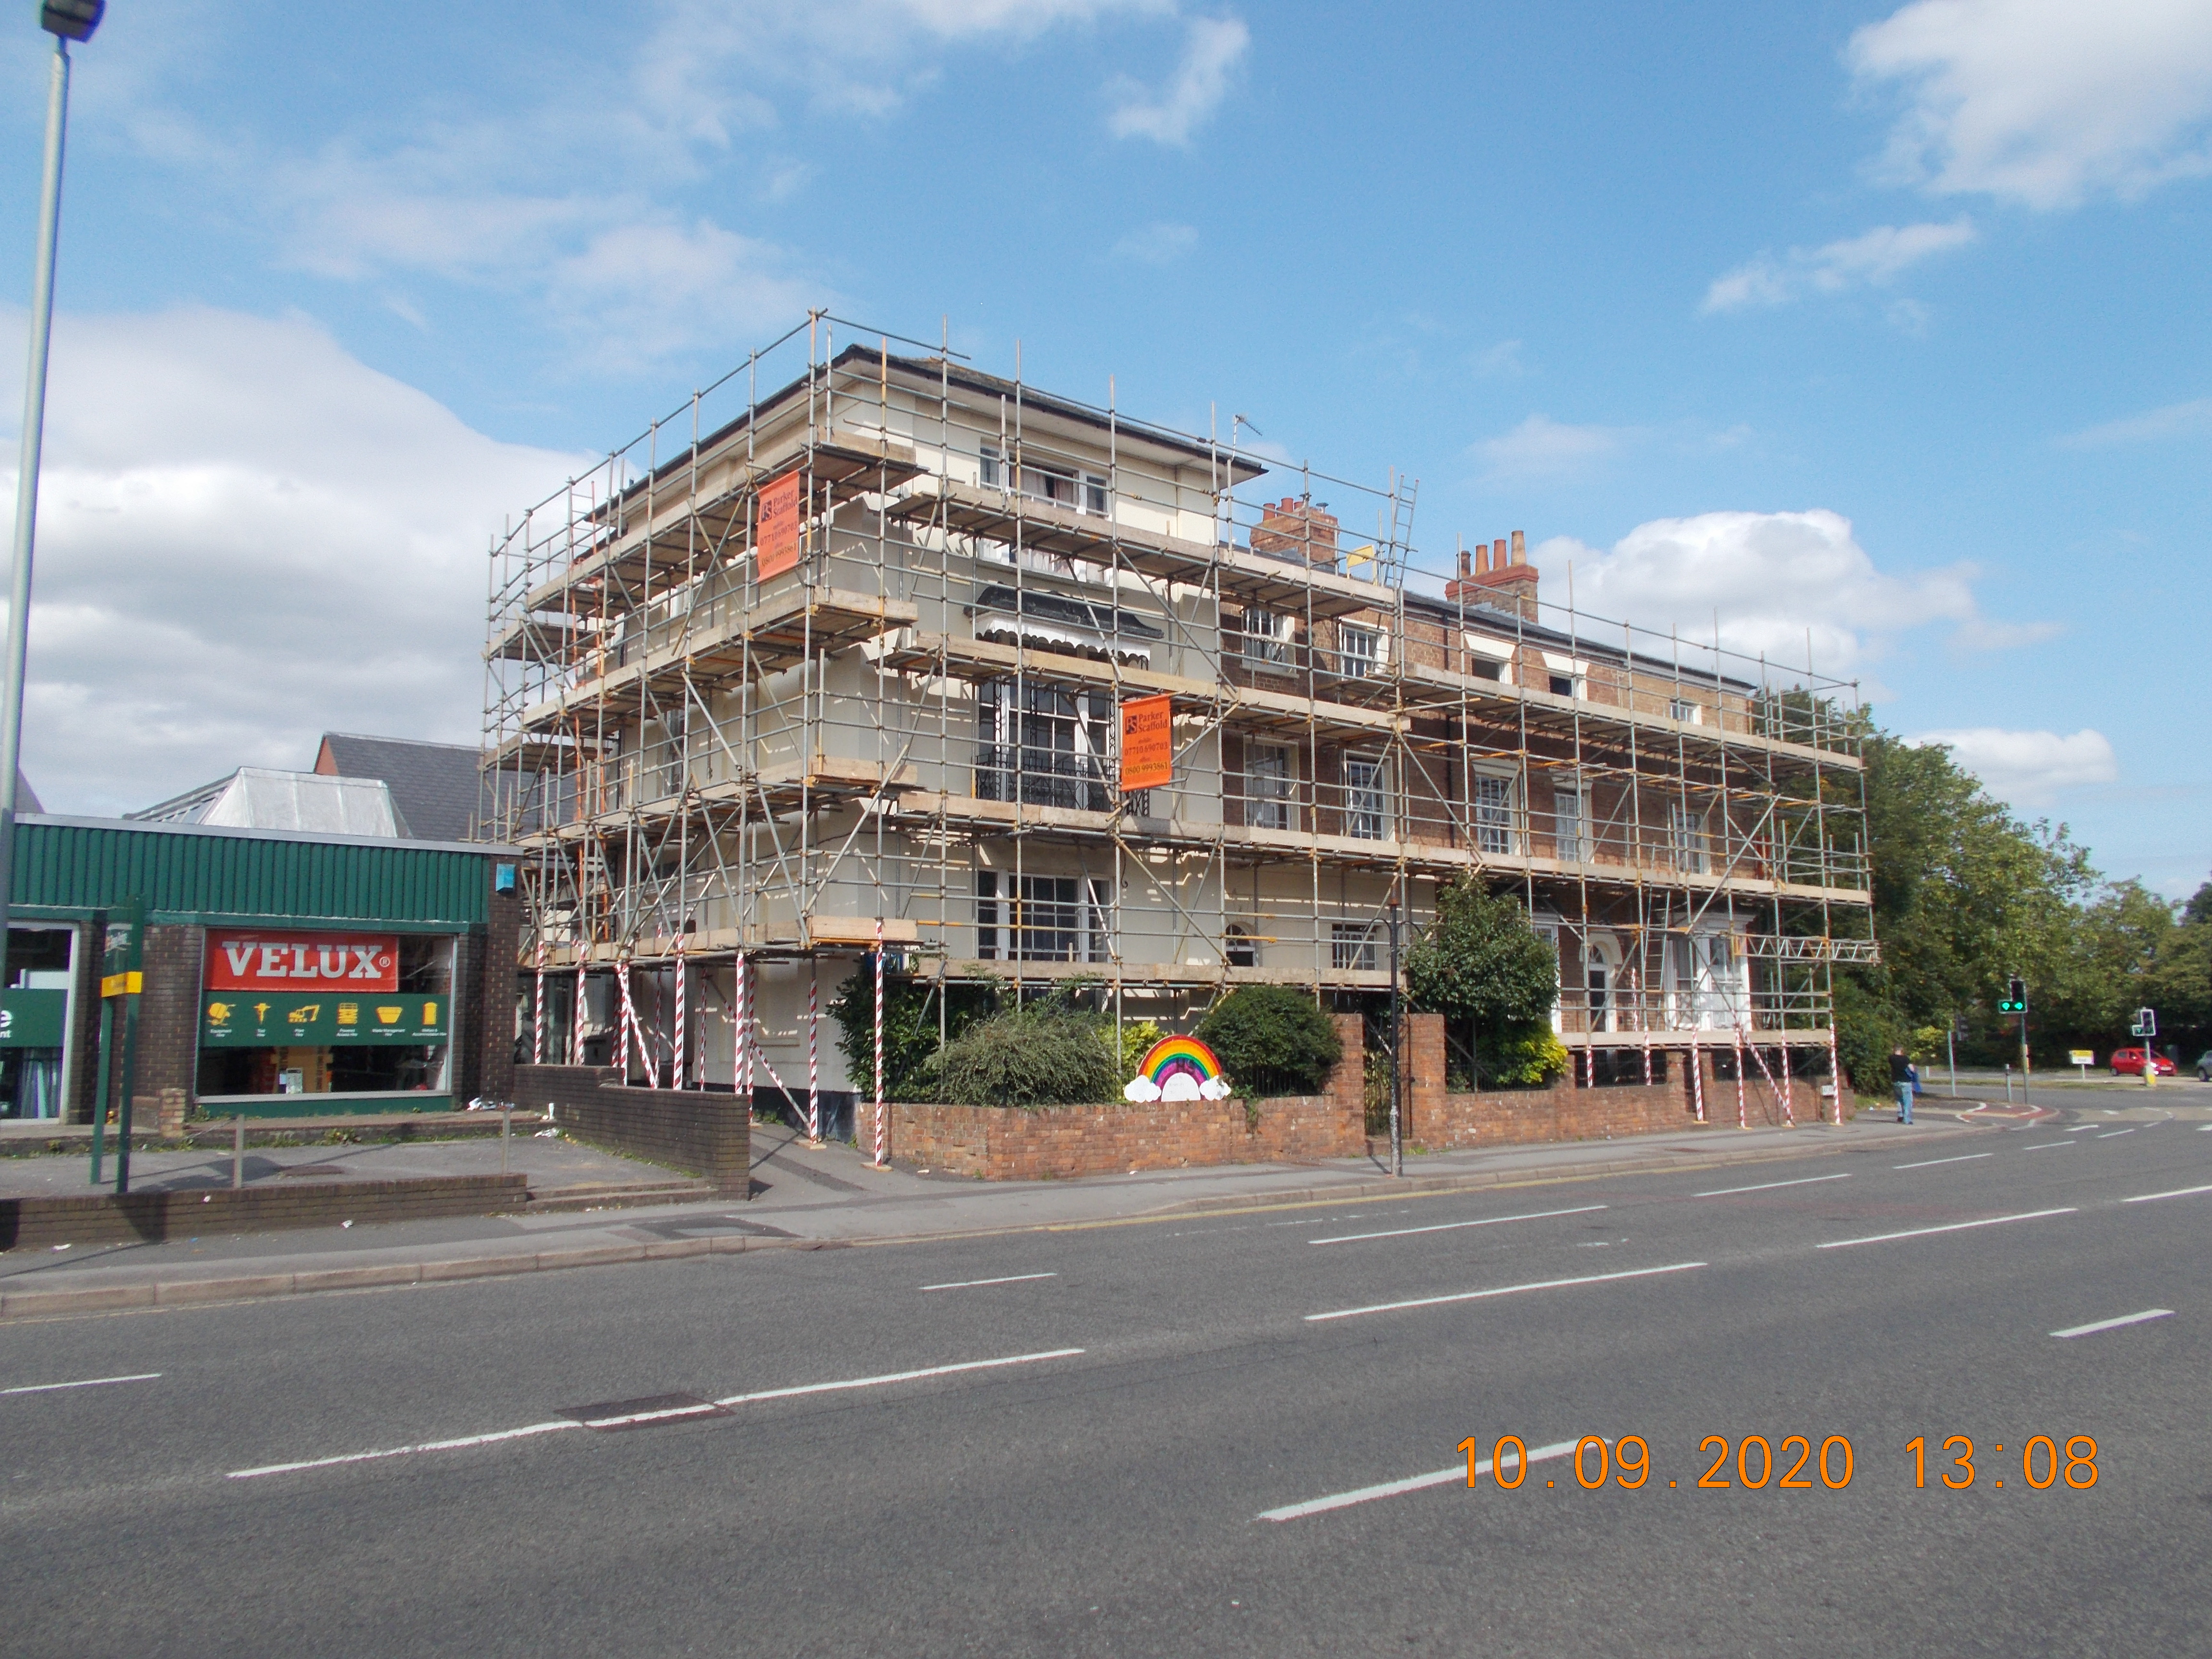 Parker Scaffold - Scaffolding Hire in Taunton and Somerset